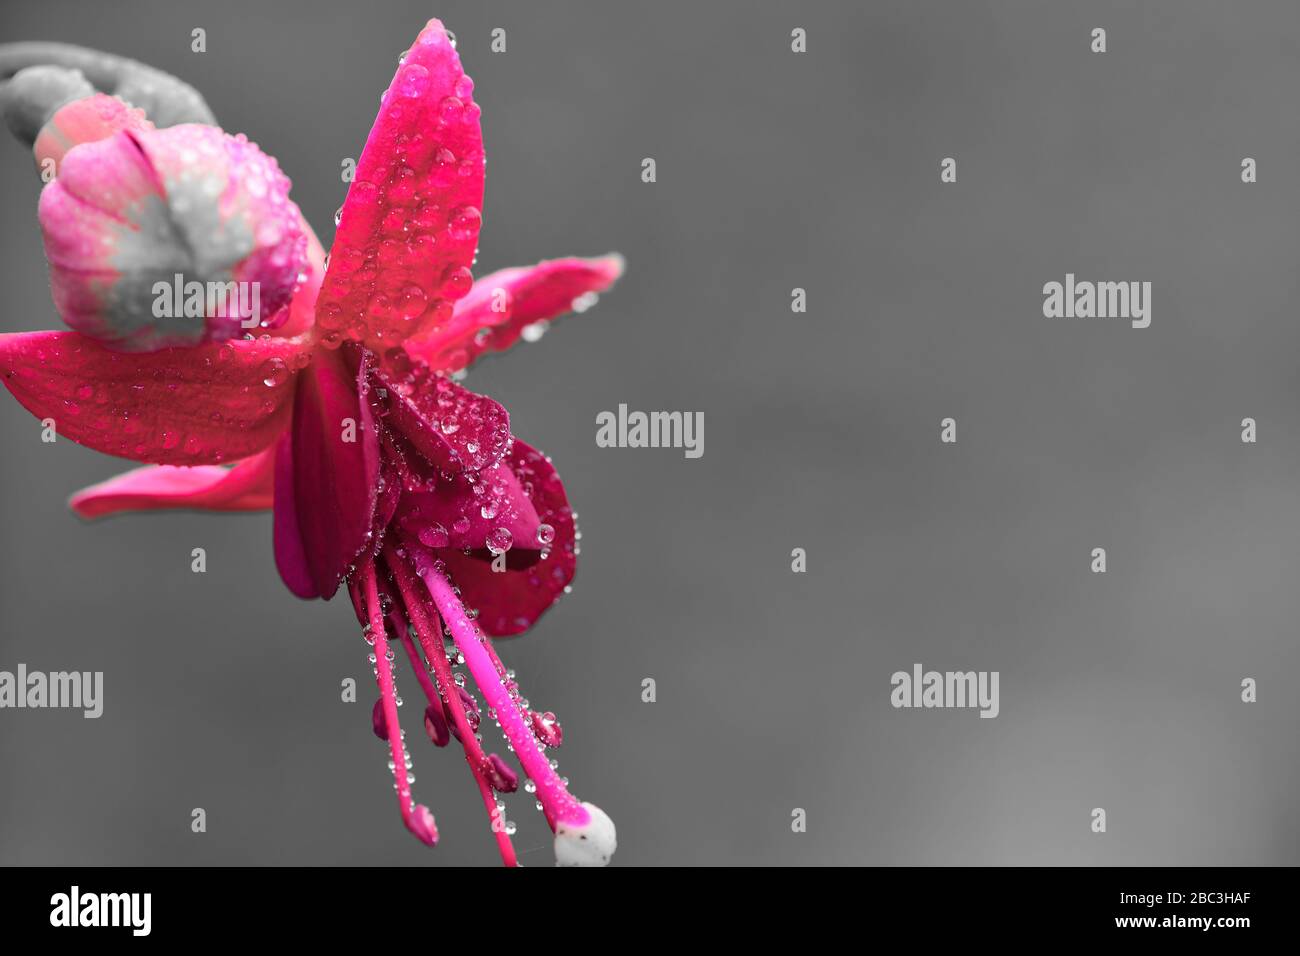 Macro shot of a pink fuchsia flower covered in dew droplets Stock Photo